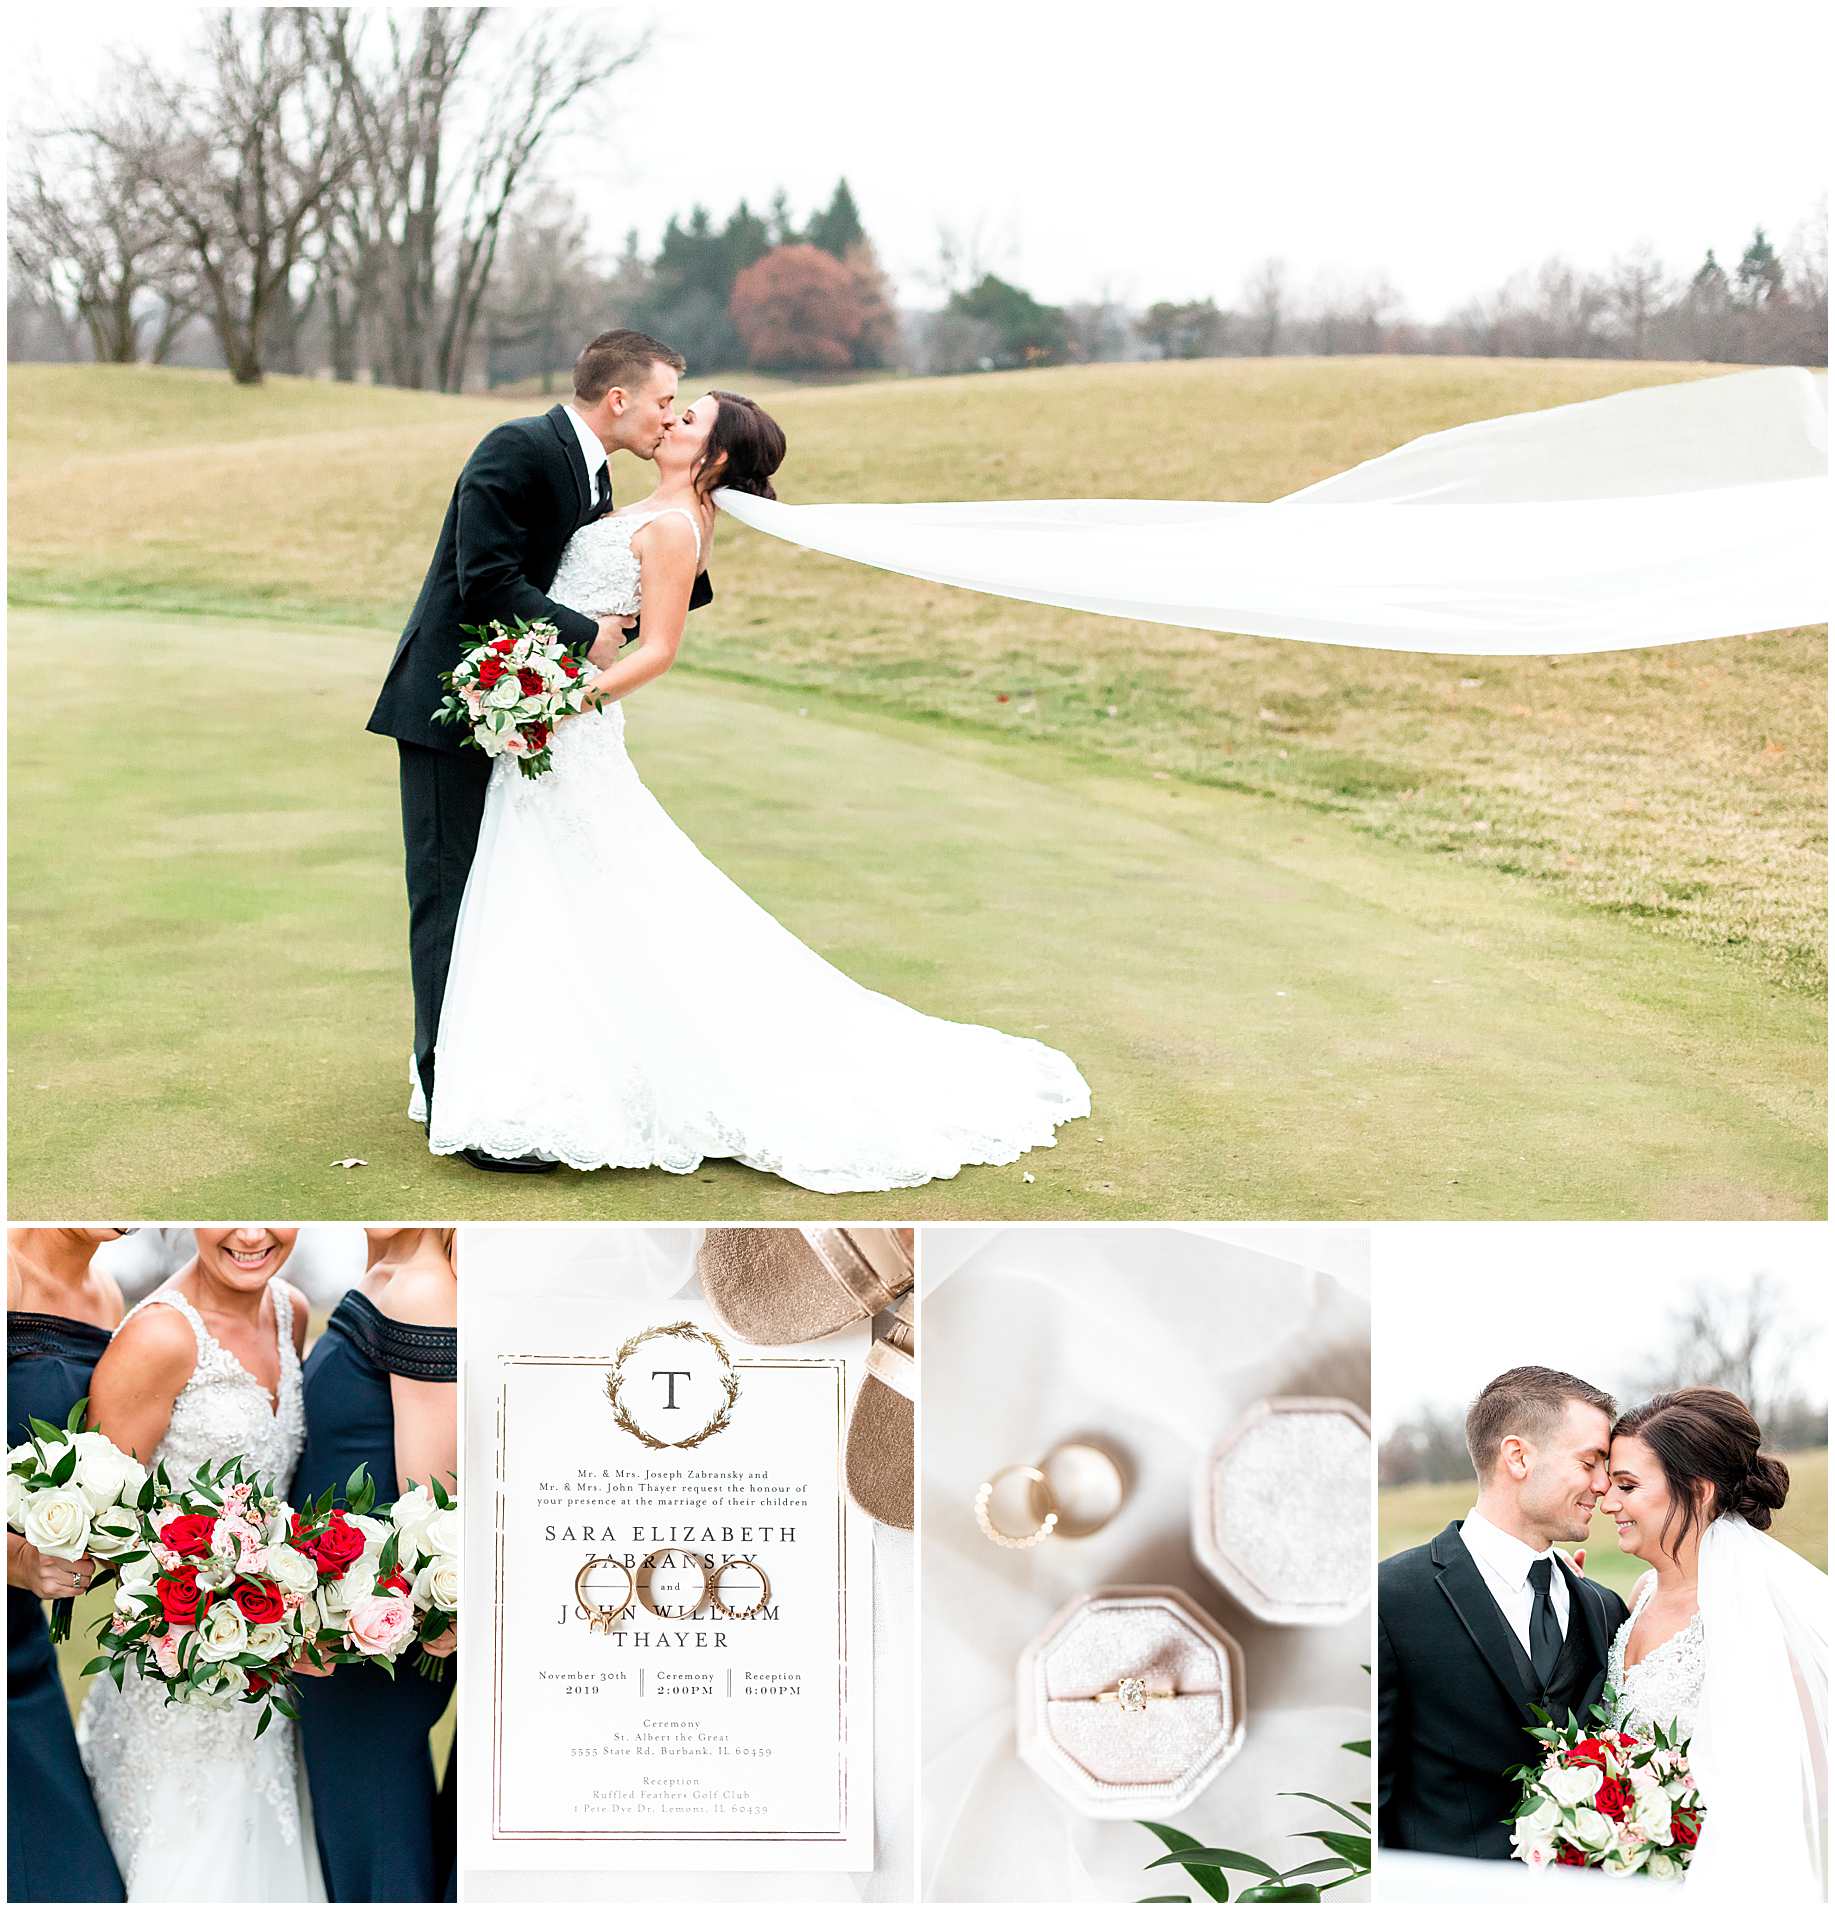 November Wedding Photos on golf course at Ruffled Feathers Golf Club in Lemont, IL